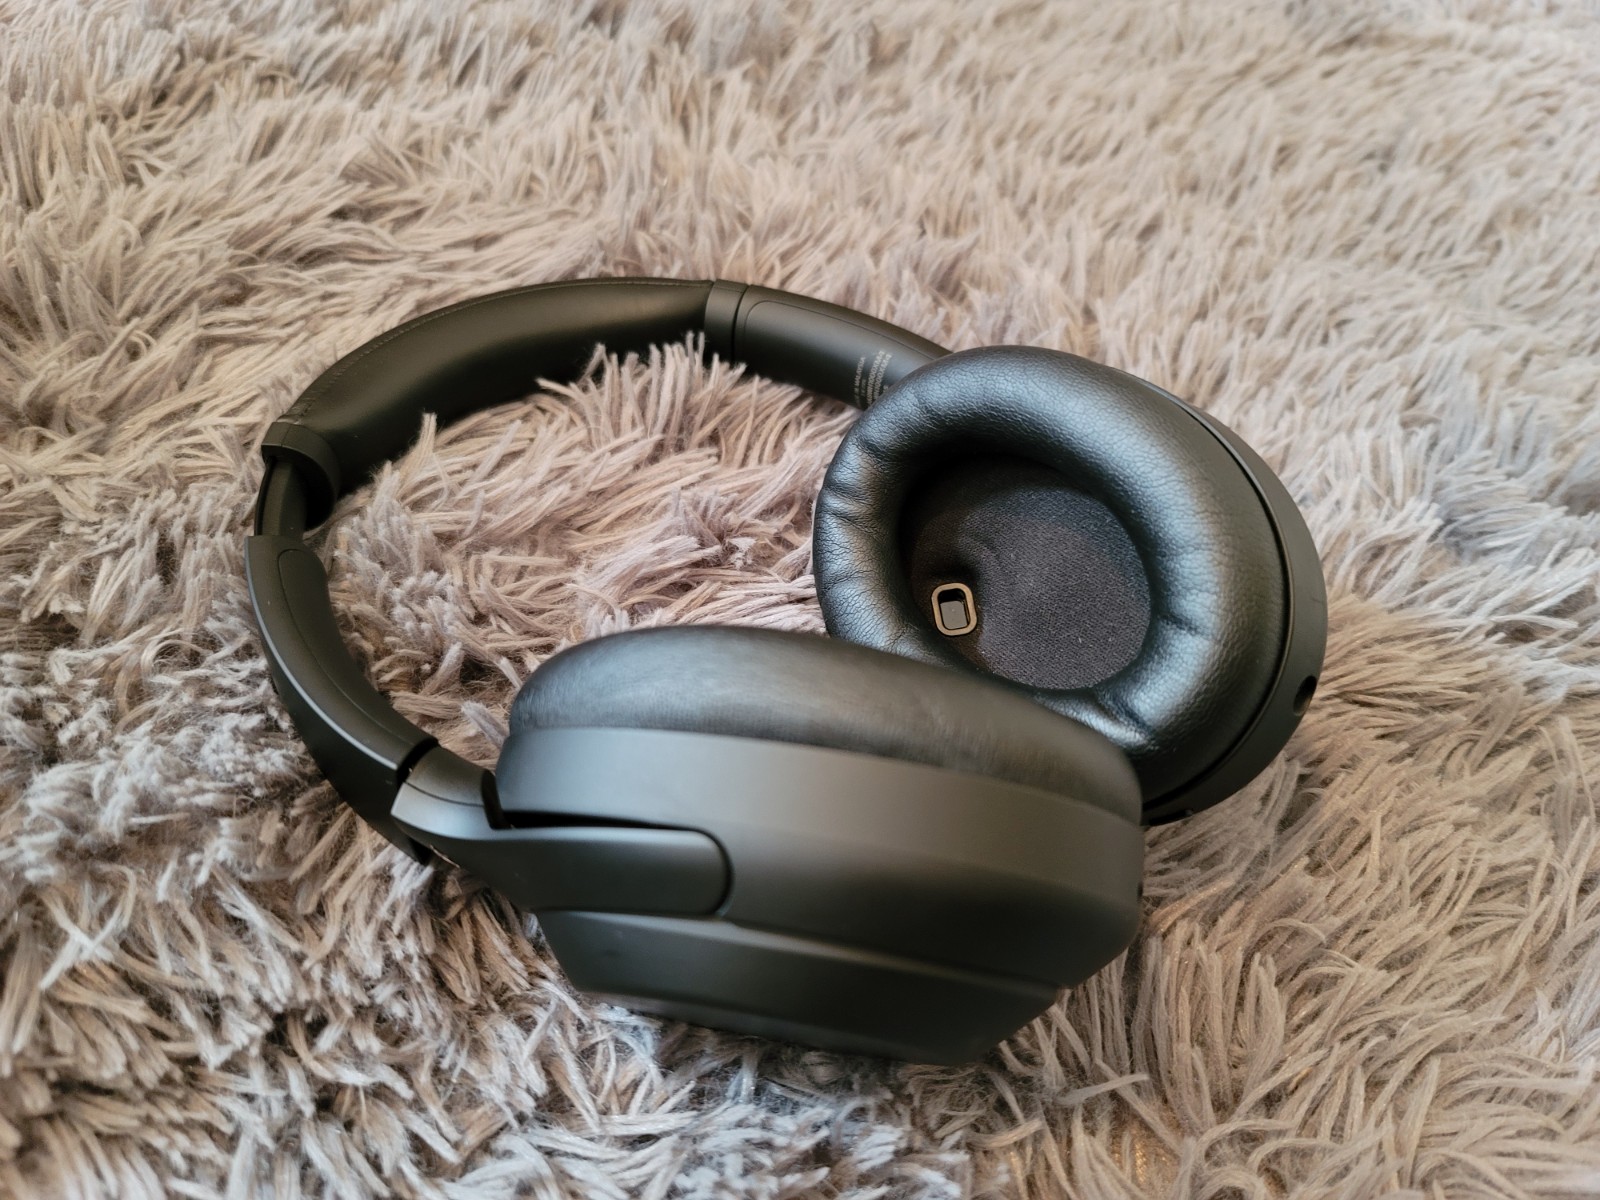 Sony Wh-1000Xm4 Wireless Headphones Features And Review  